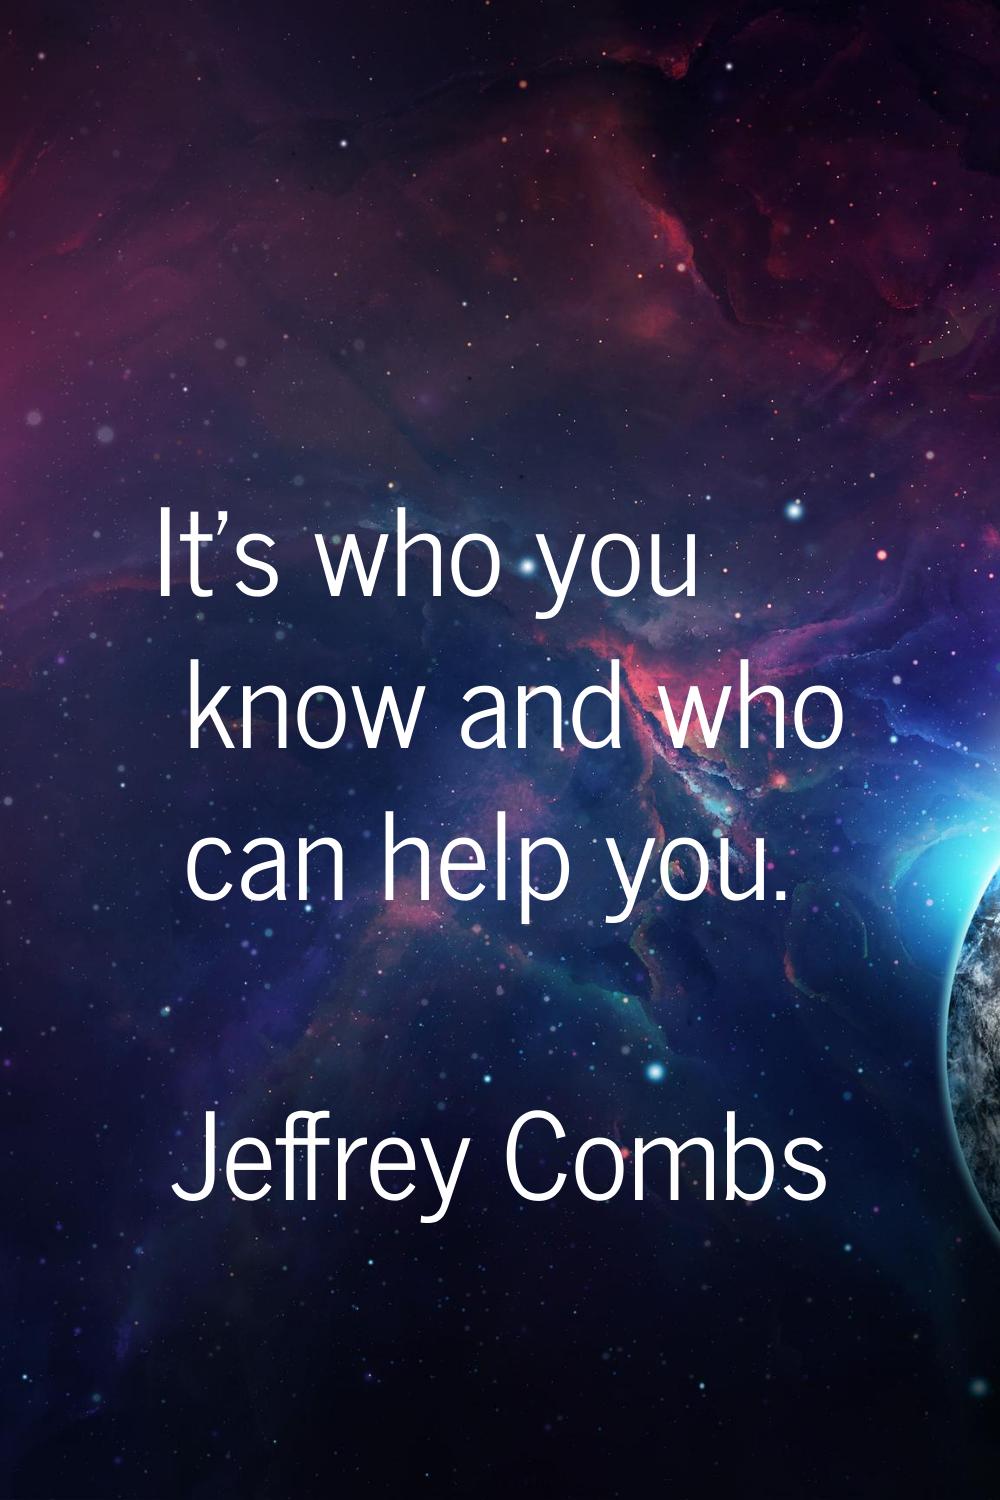 It's who you know and who can help you.